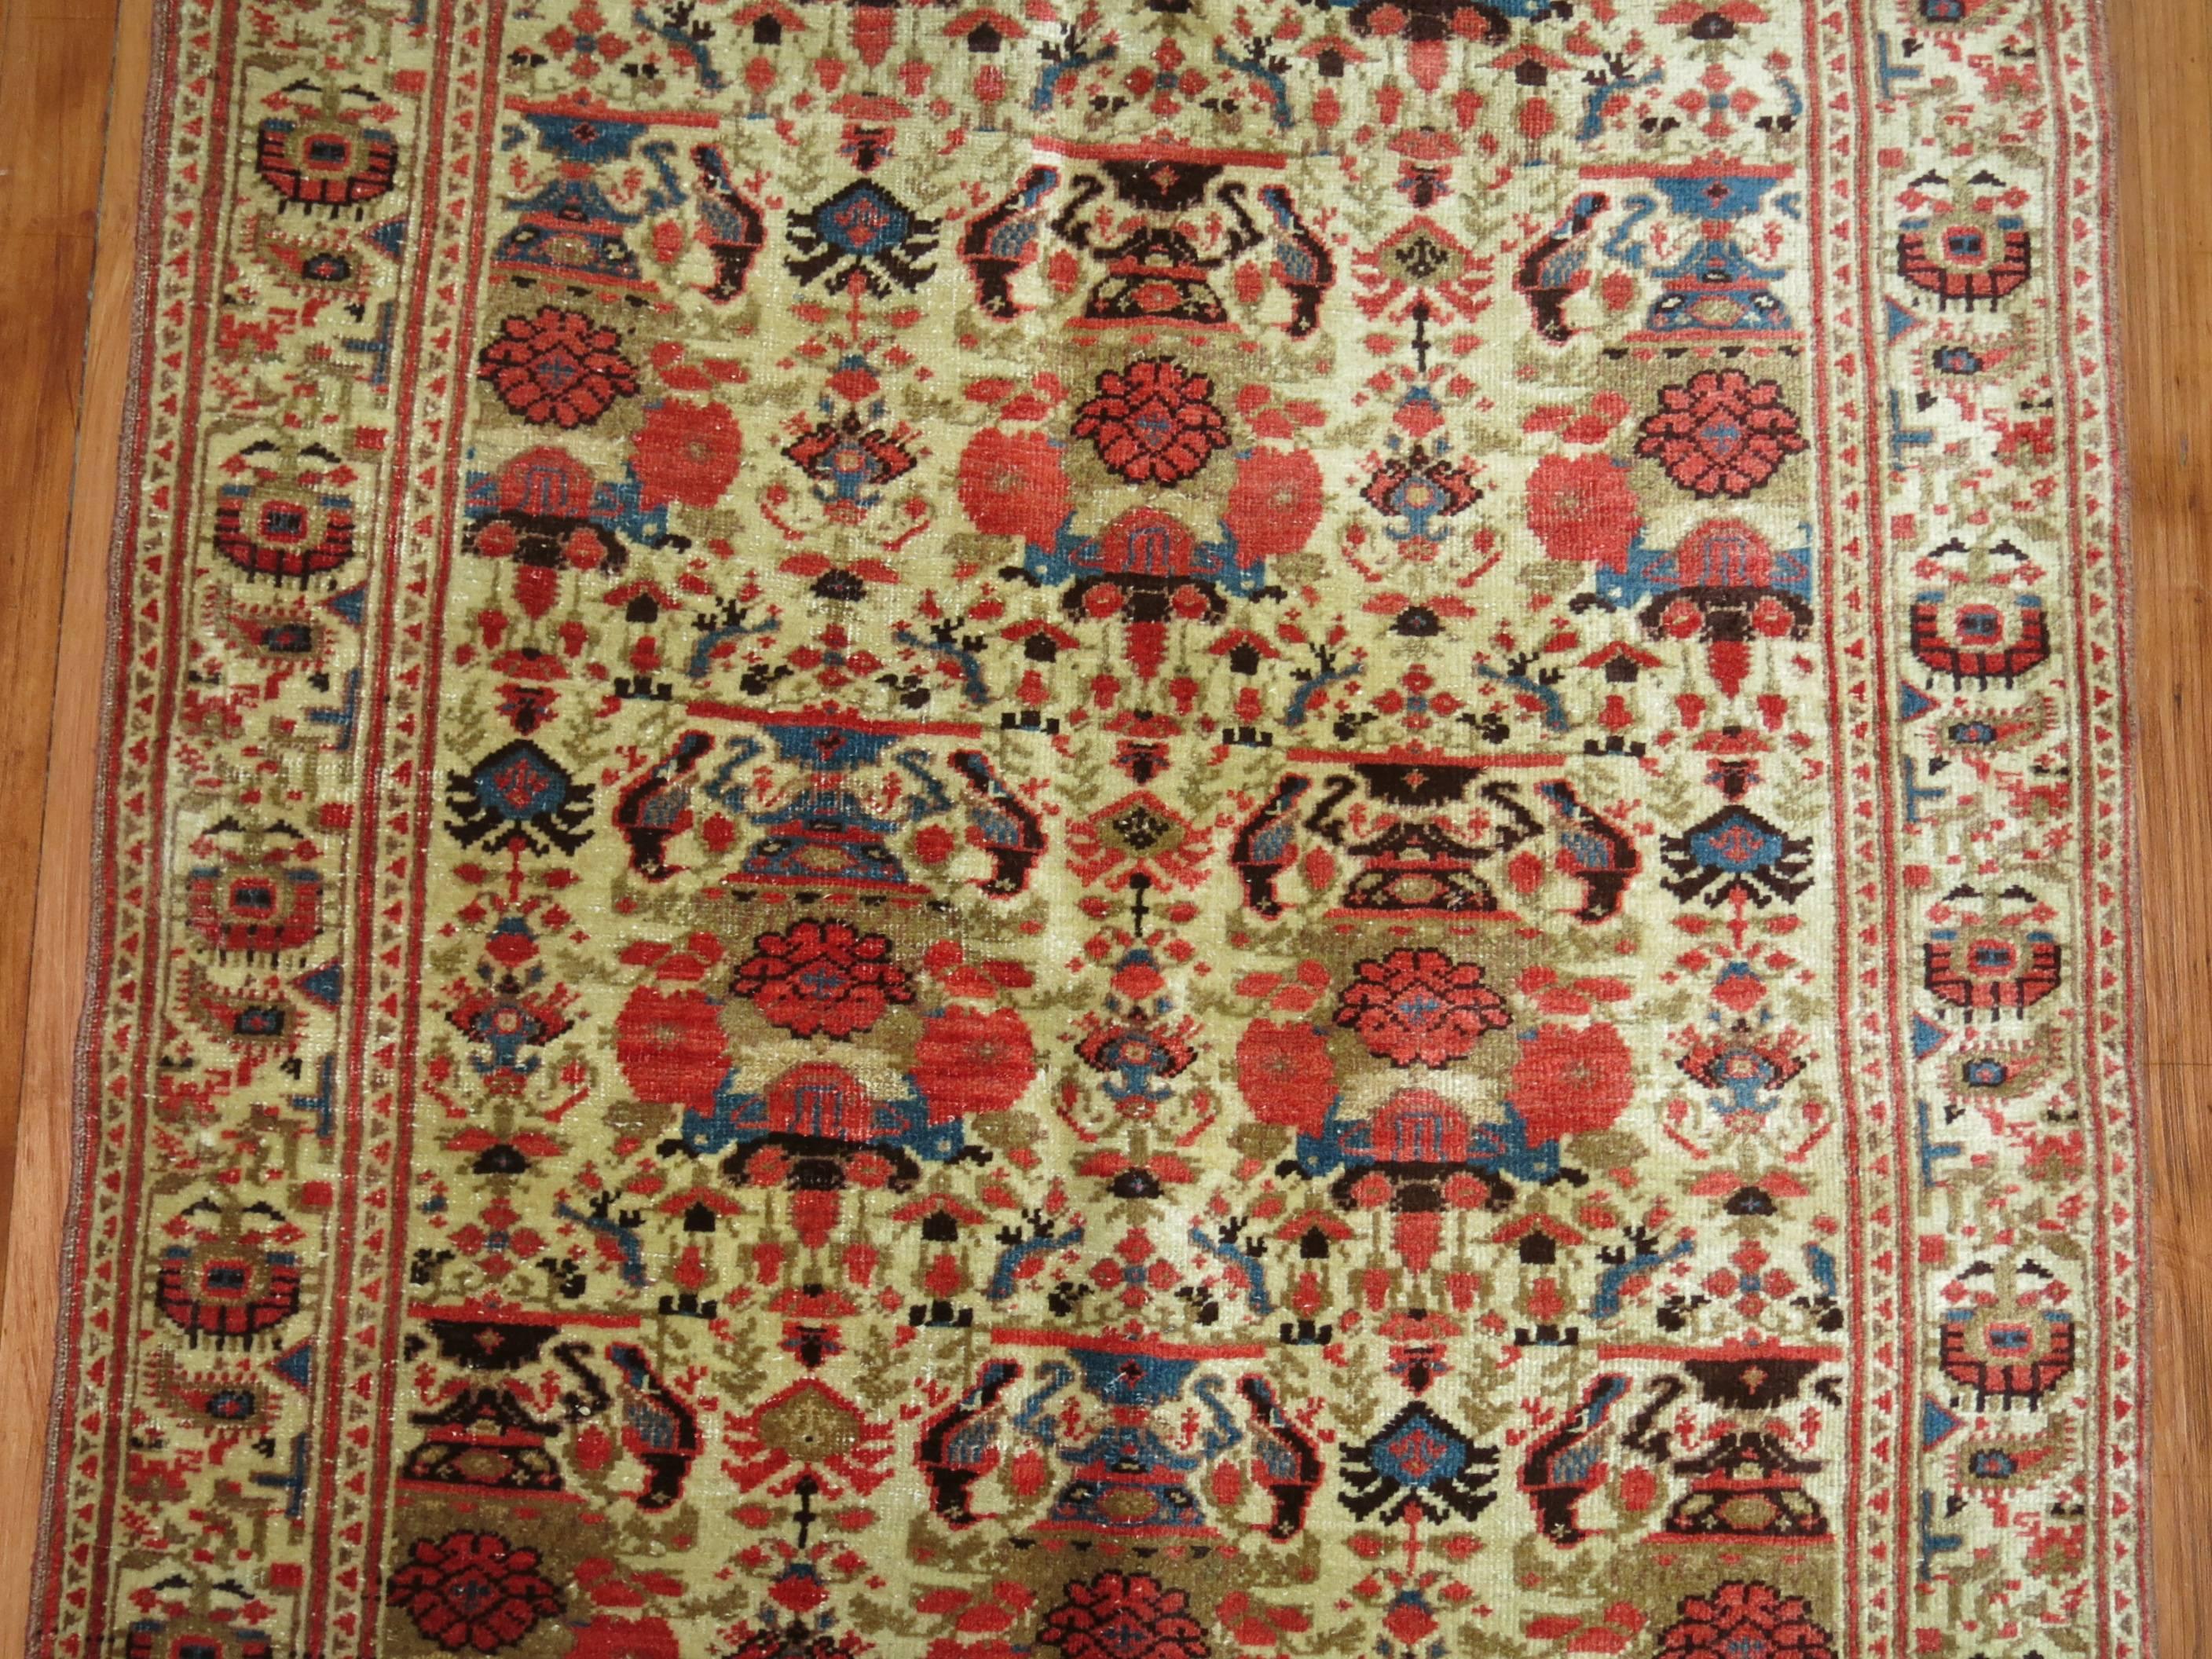 An exquisite Persian Malayer runner with an all-over floral design surrounded by an elaborate floral border.